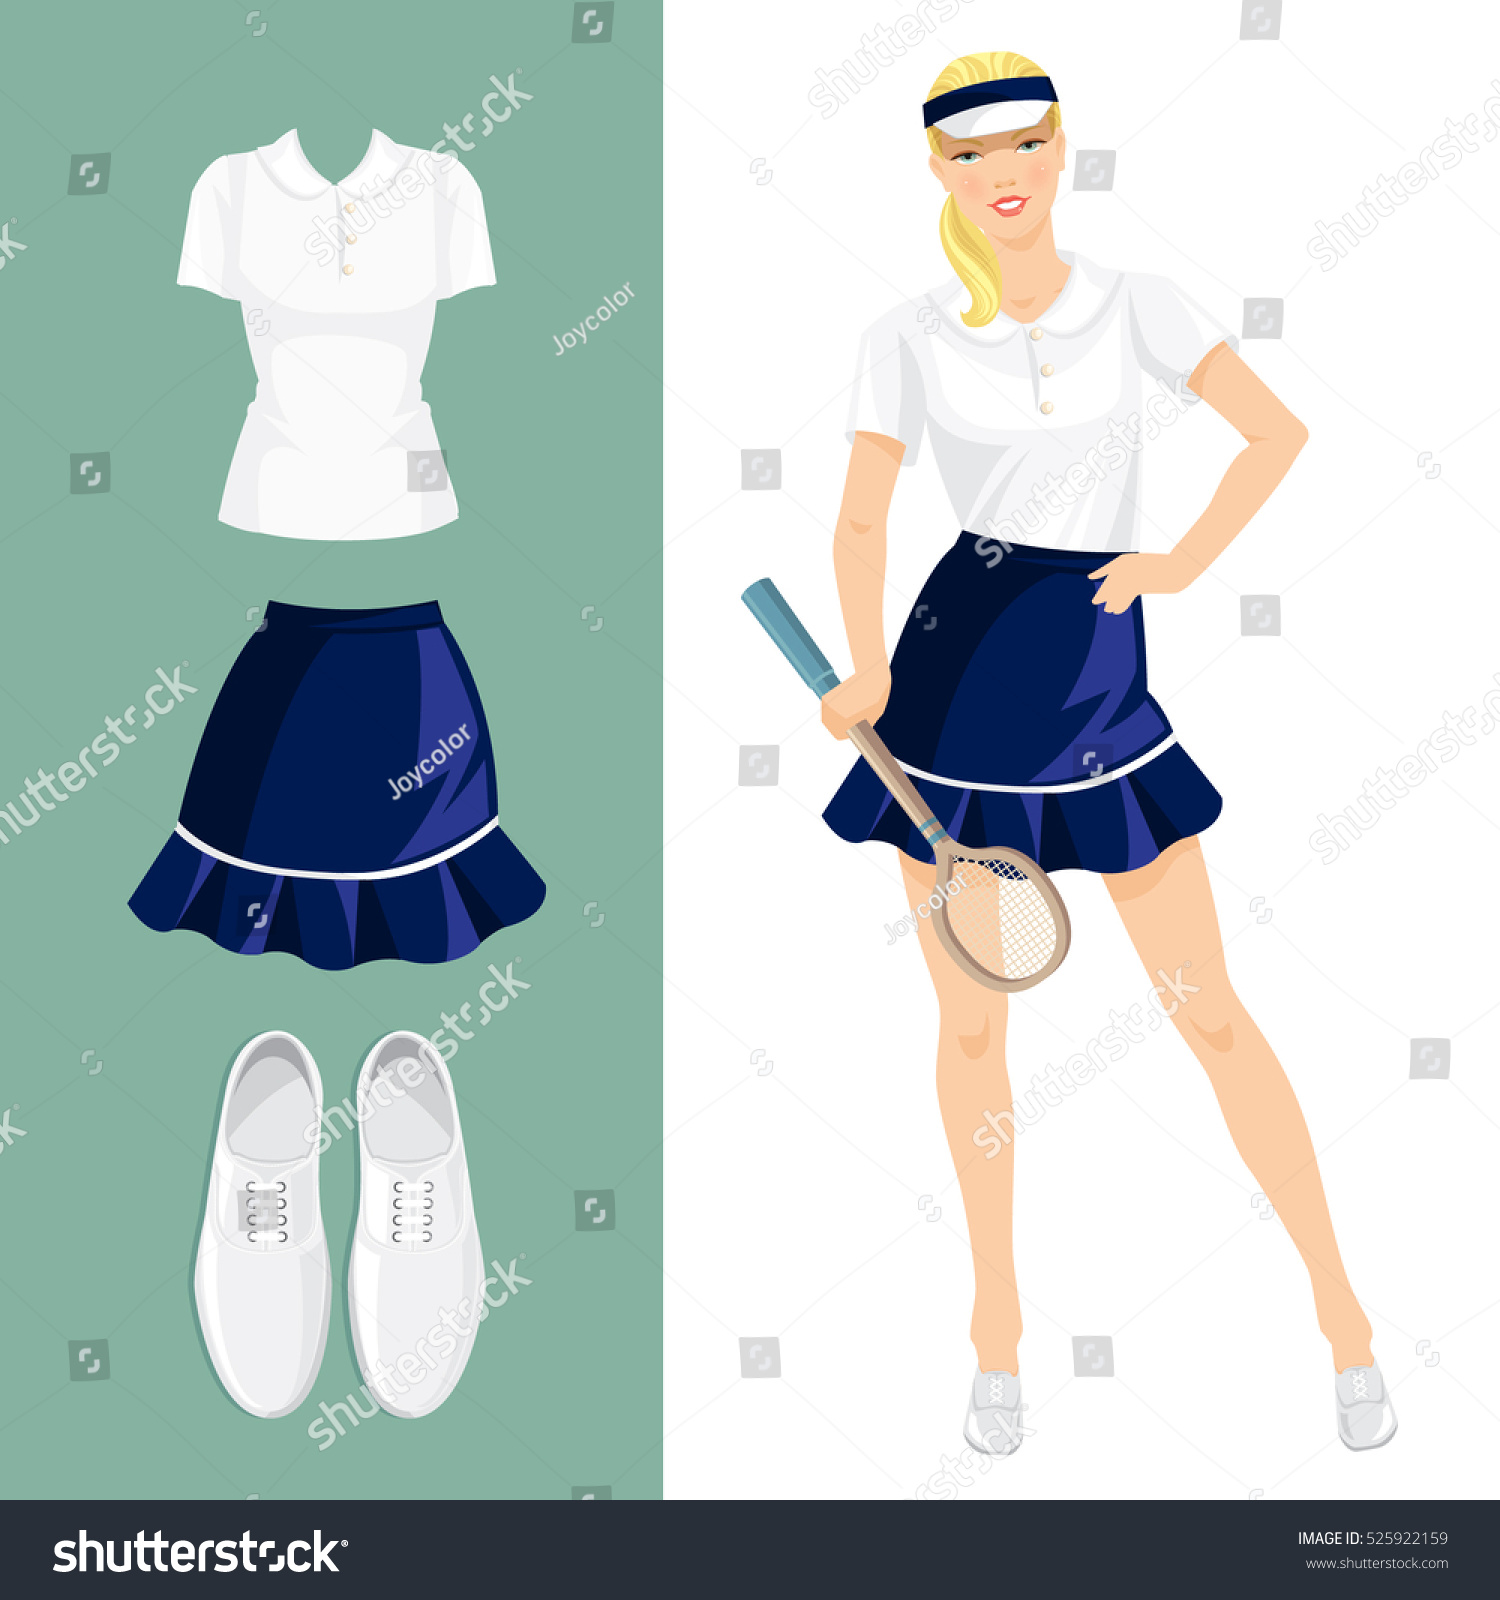 tennis player outfit girl